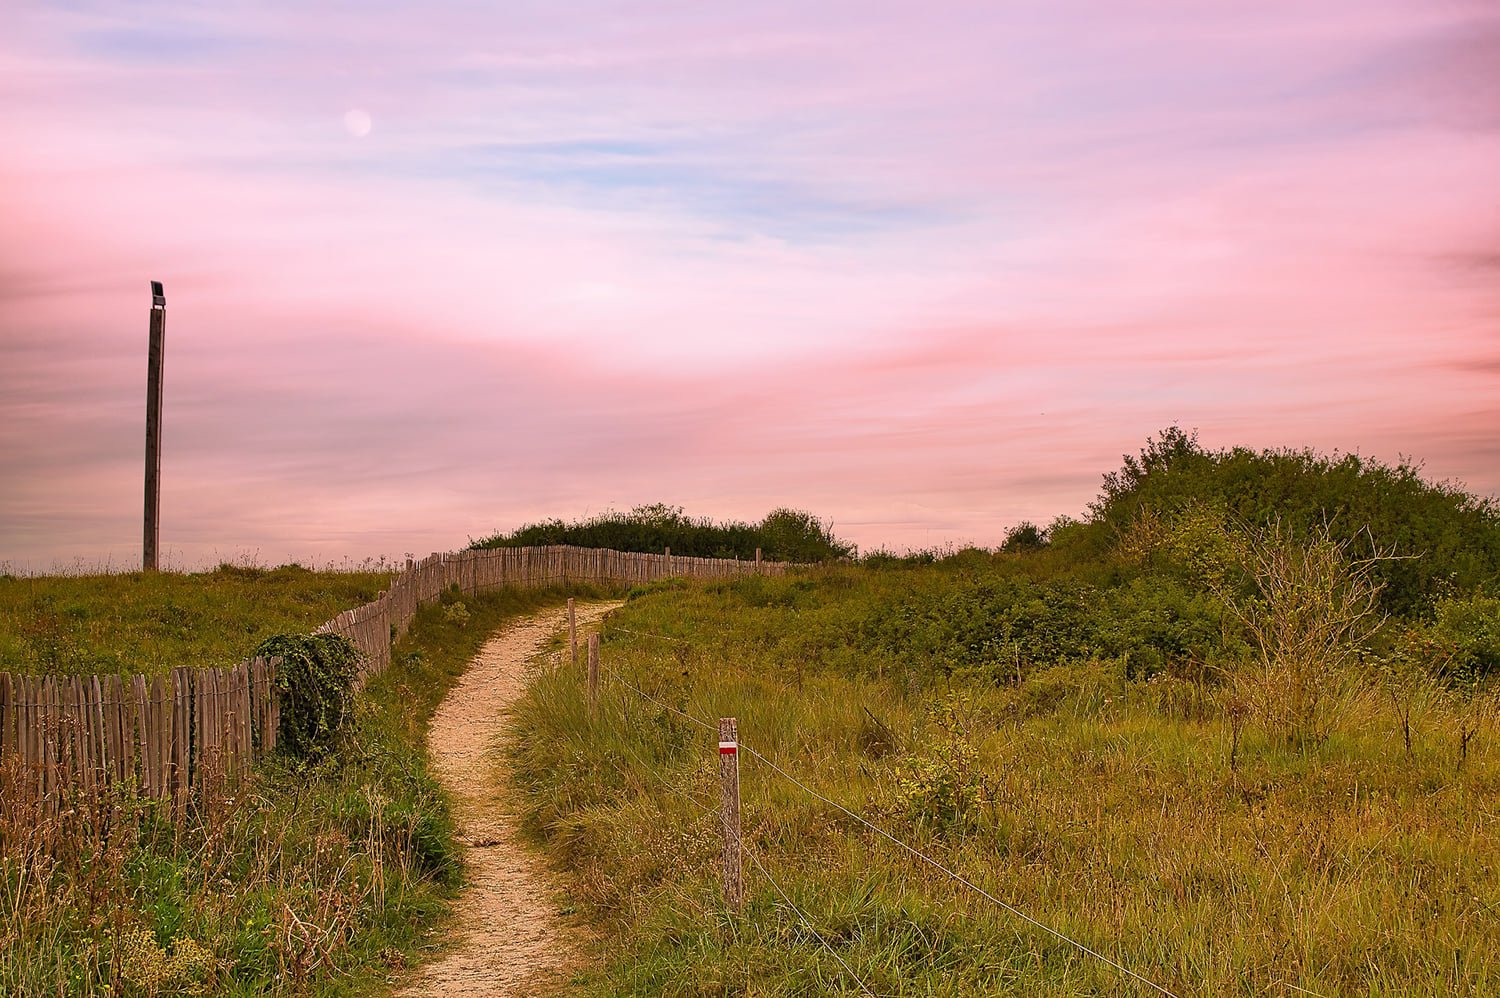 A beach path leads over the dunes in Normandy France.